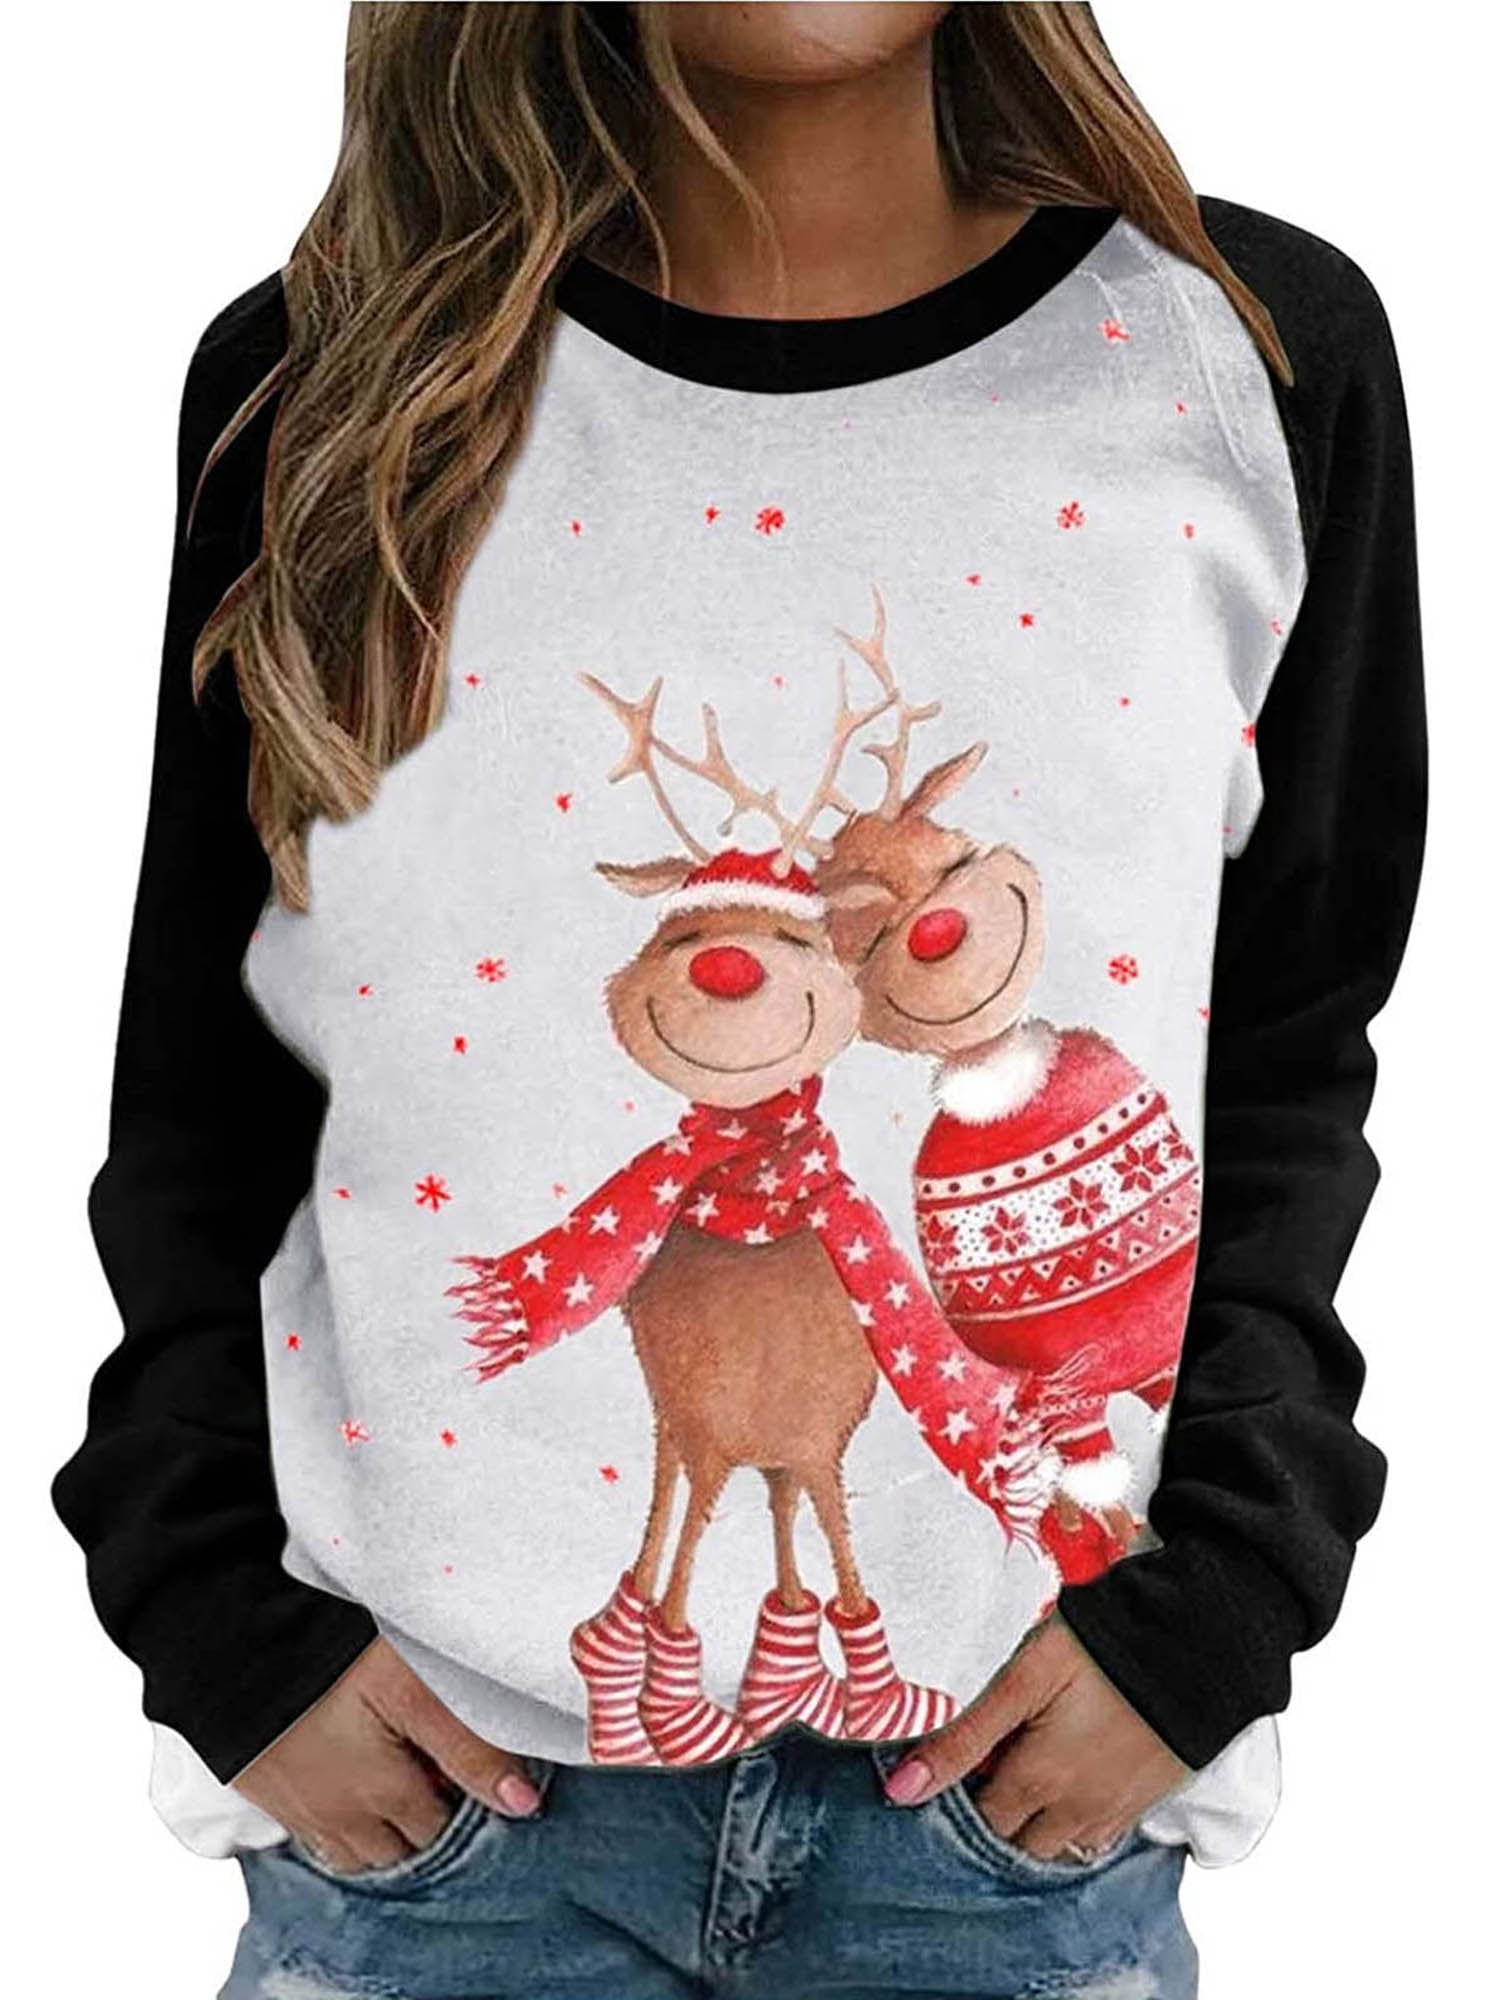 aihihe Ugly Christmas Sweater Sweatshirts for Women Plus Size Snowman Hoodies Casual Loose Long Sleeve Tops Blouse Pullover 